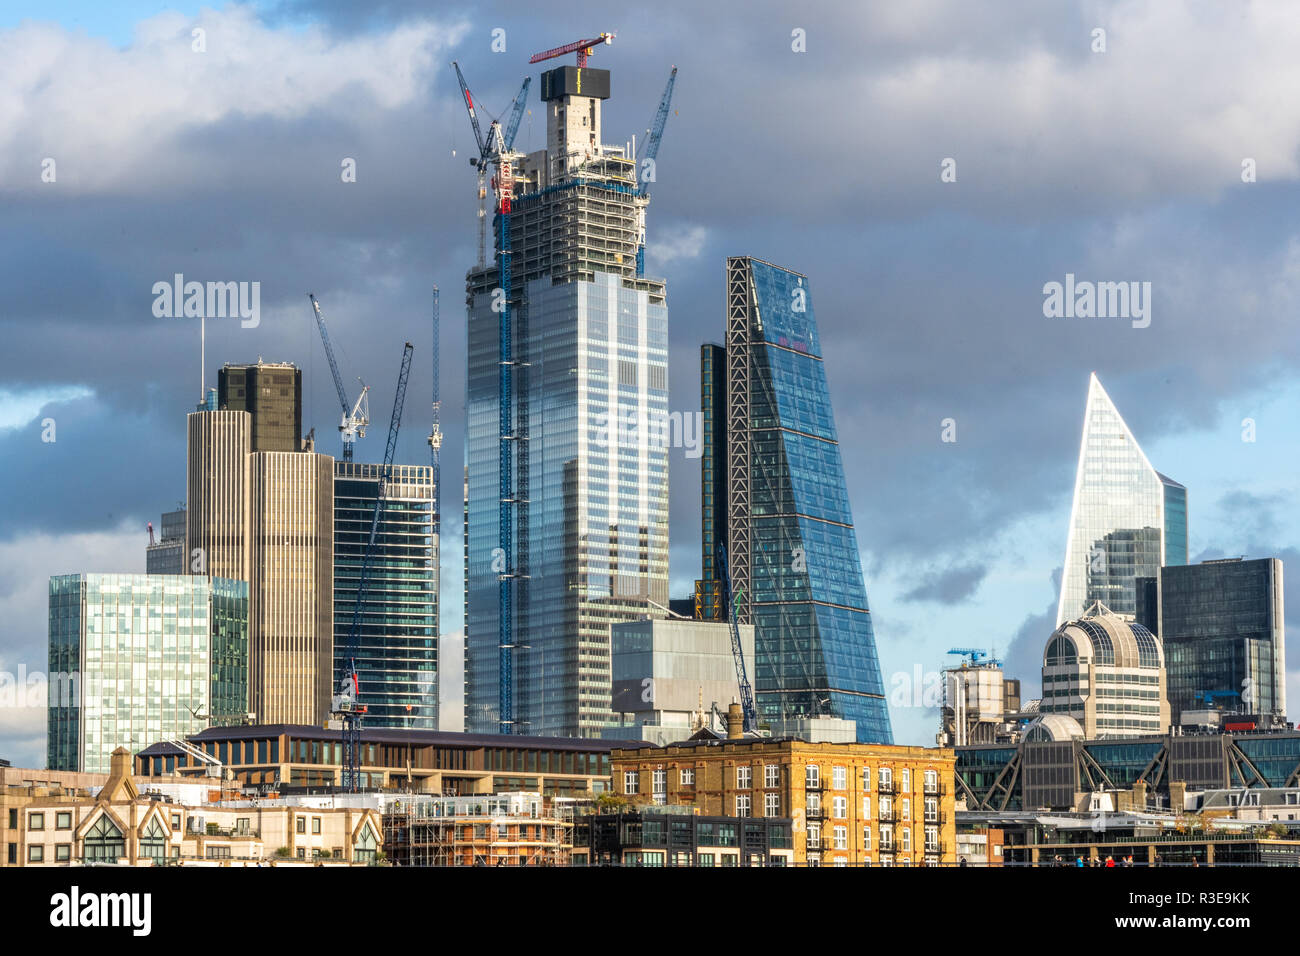 Skyscrapers under construction over Blackfriars Bridge in London, England on sunny day. Stock Photo